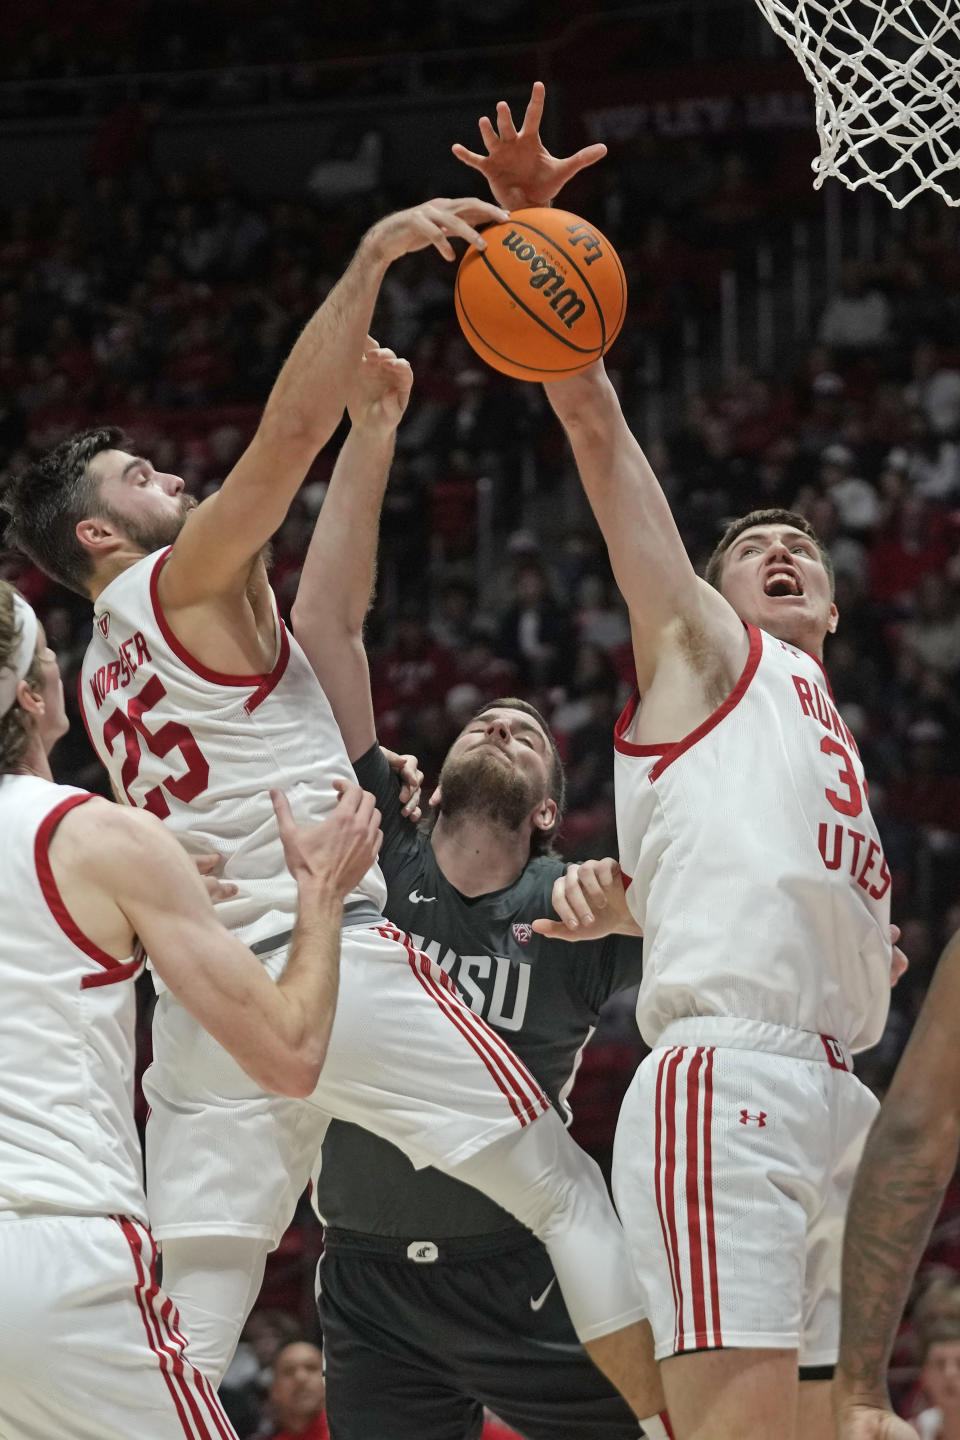 Washington State forward Oscar Cluff, center, battles with Utah's Rollie Worster (25) and Lawson Lovering (34) during the first half of an NCAA college basketball Friday, Dec. 29, 2023, in Salt Lake City. (AP Photo/Rick Bowmer)